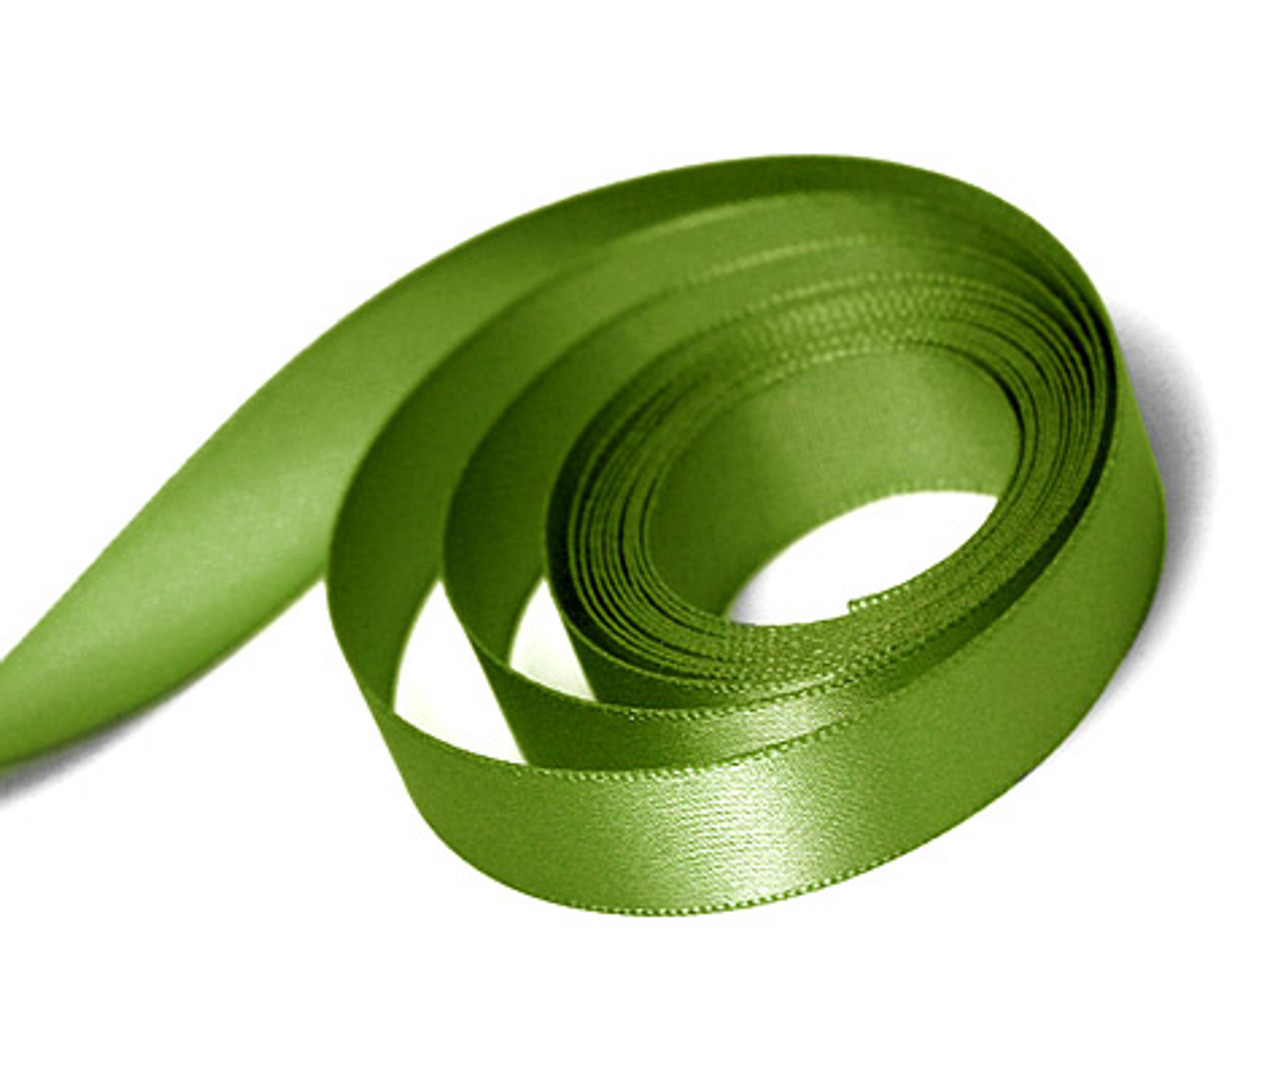 7/8" X 100yds Hot Deal Double Face Satin Ribbon Bud Green - ea.